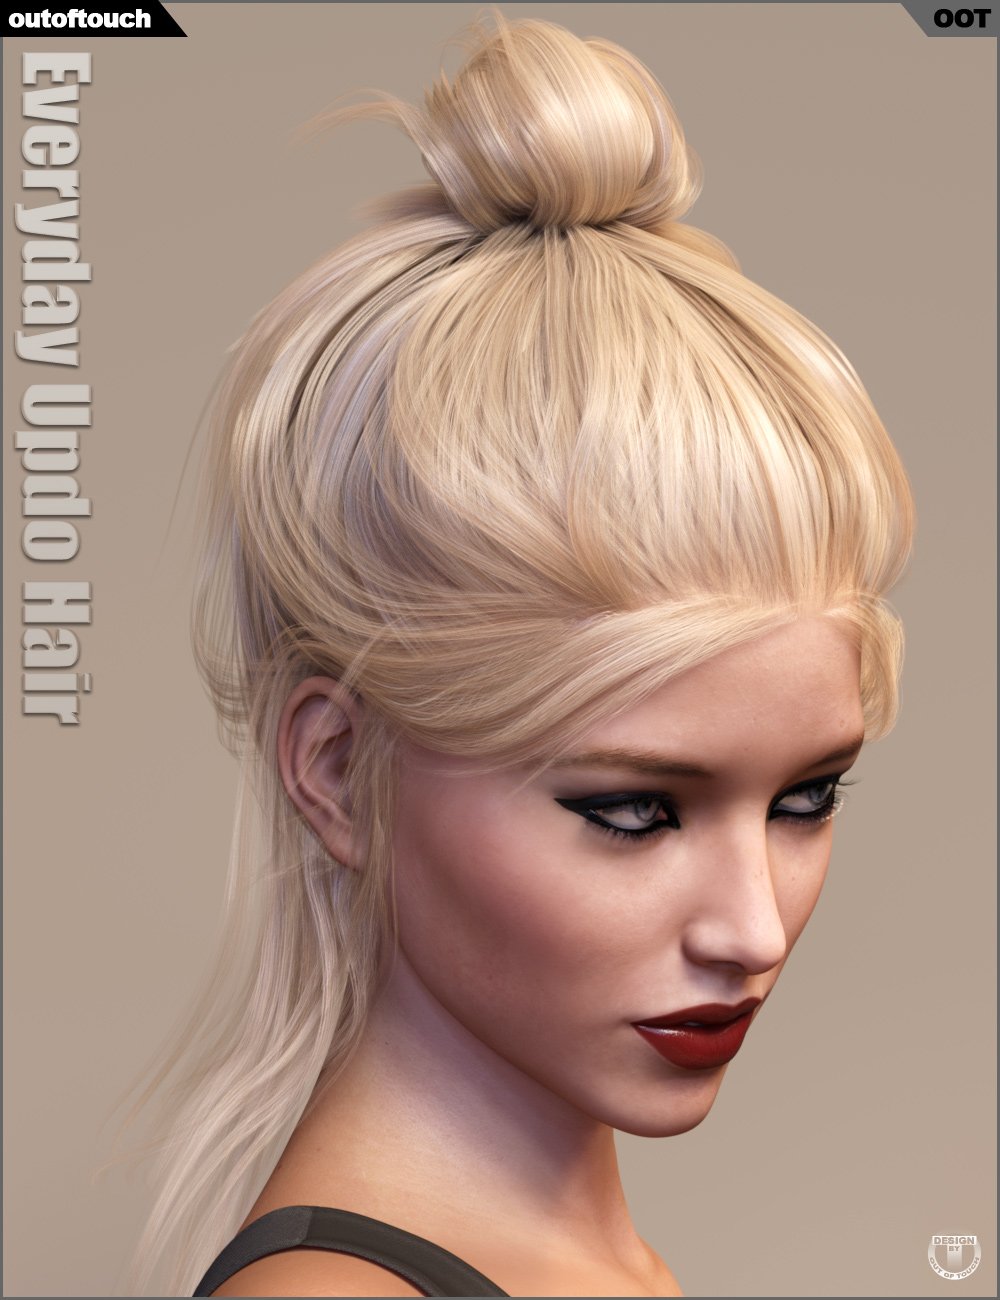 Everyday Updo Hair and OOT Hairblending 2.0 for Genesis 3 Female(s) by: outoftouch, 3D Models by Daz 3D